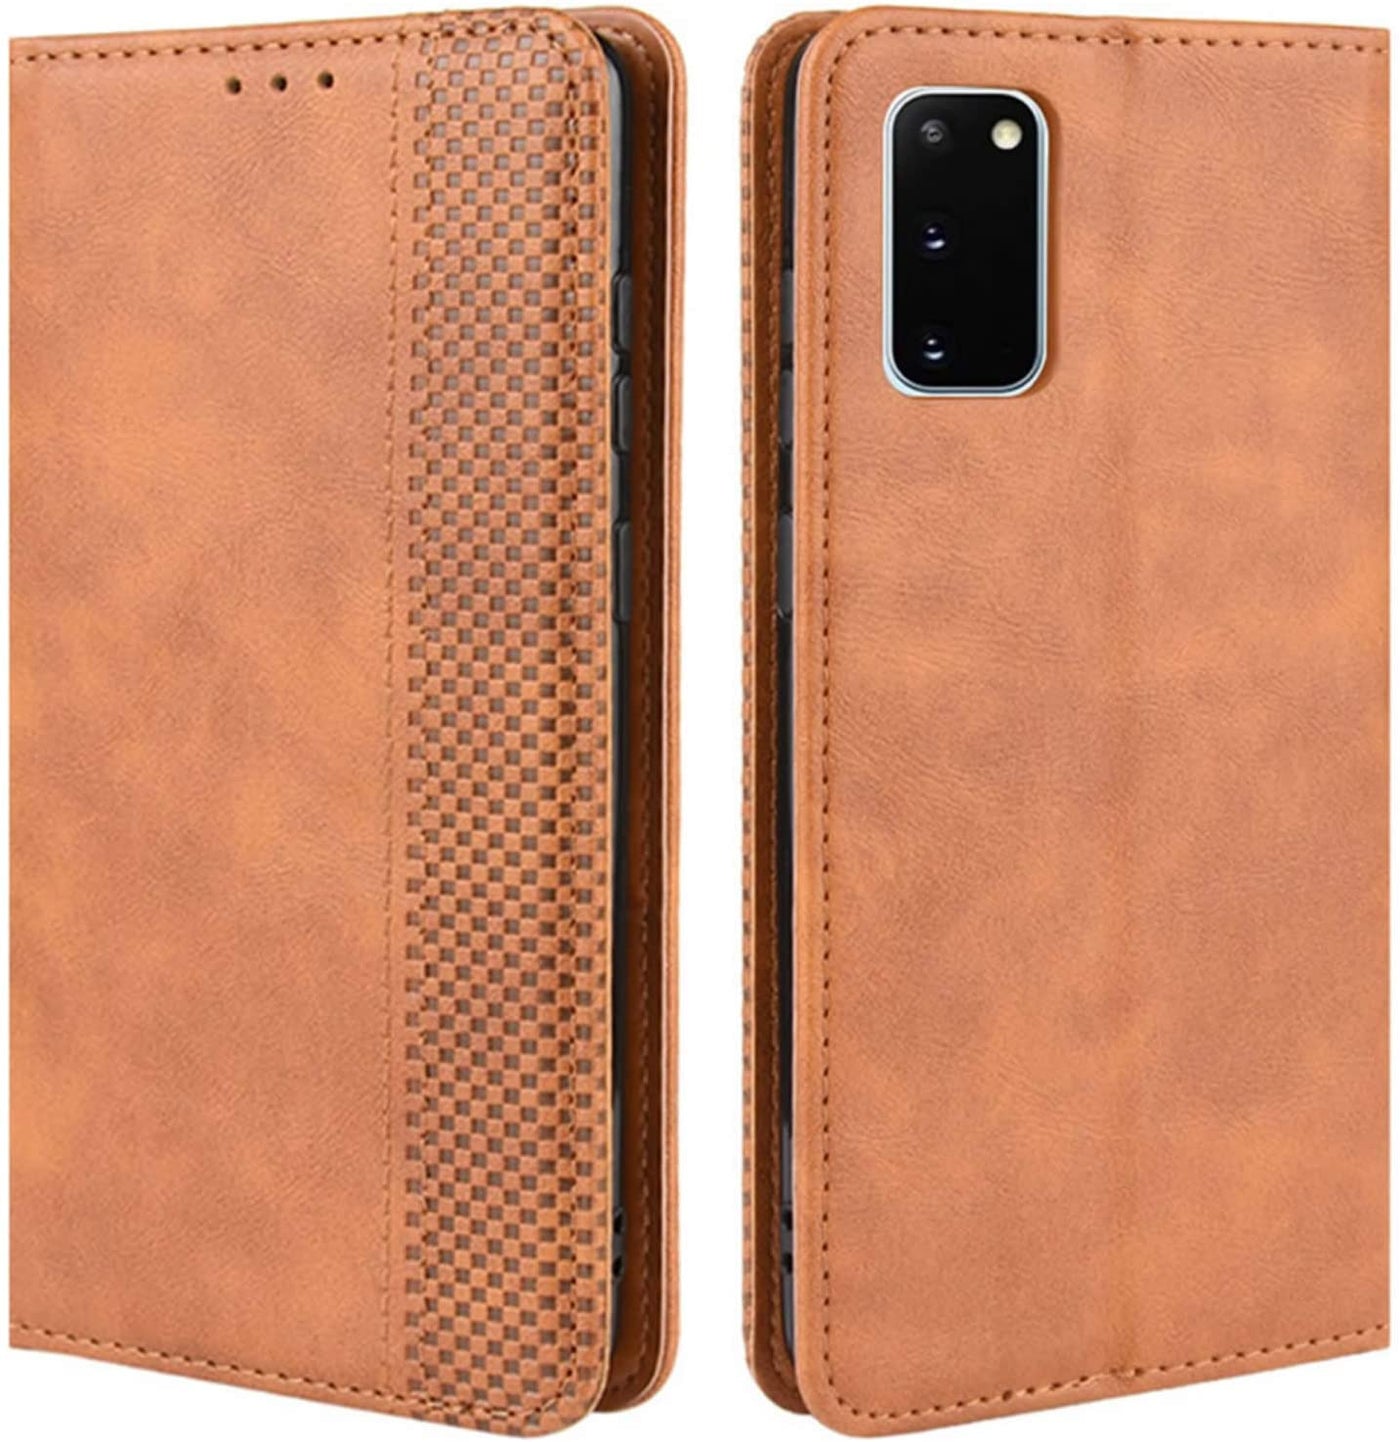 Samsung Galaxy S20 FE brown color leather wallet flip cover case By excelsior